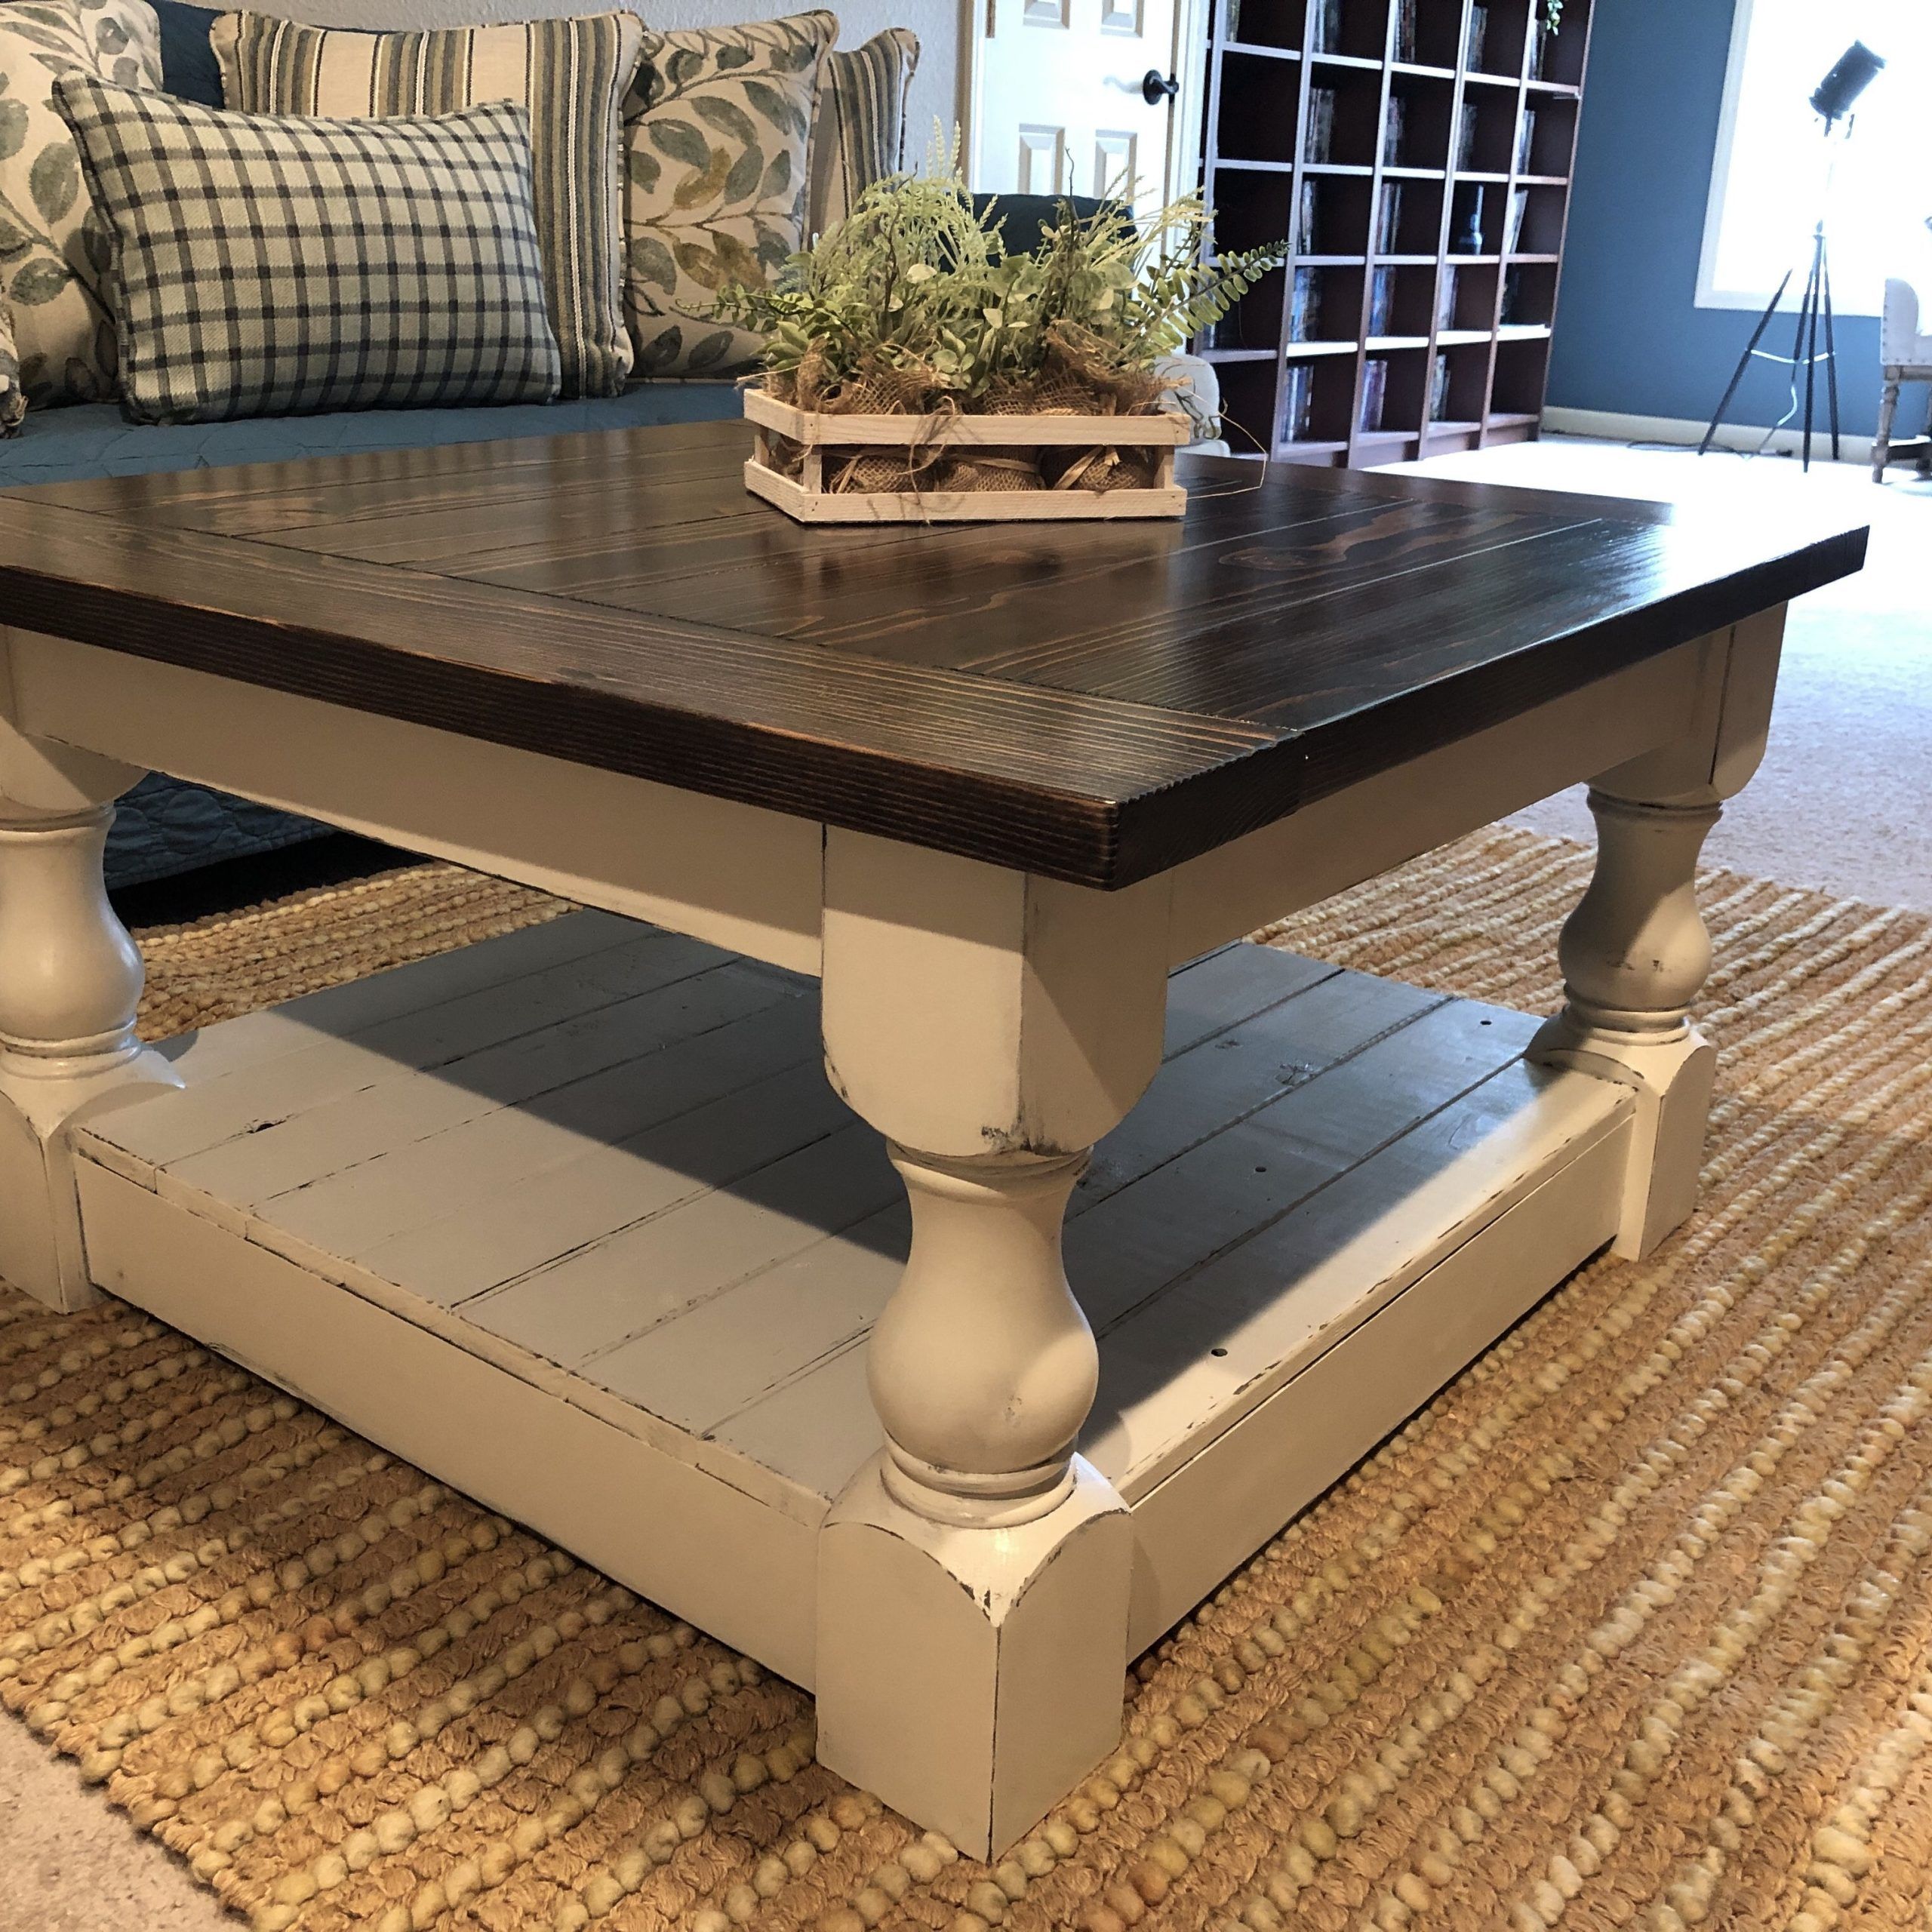 A Perfect Addition To Your Home: The Farmhouse Rustic Coffee Table Pertaining To Living Room Farmhouse Coffee Tables (Gallery 8 of 20)